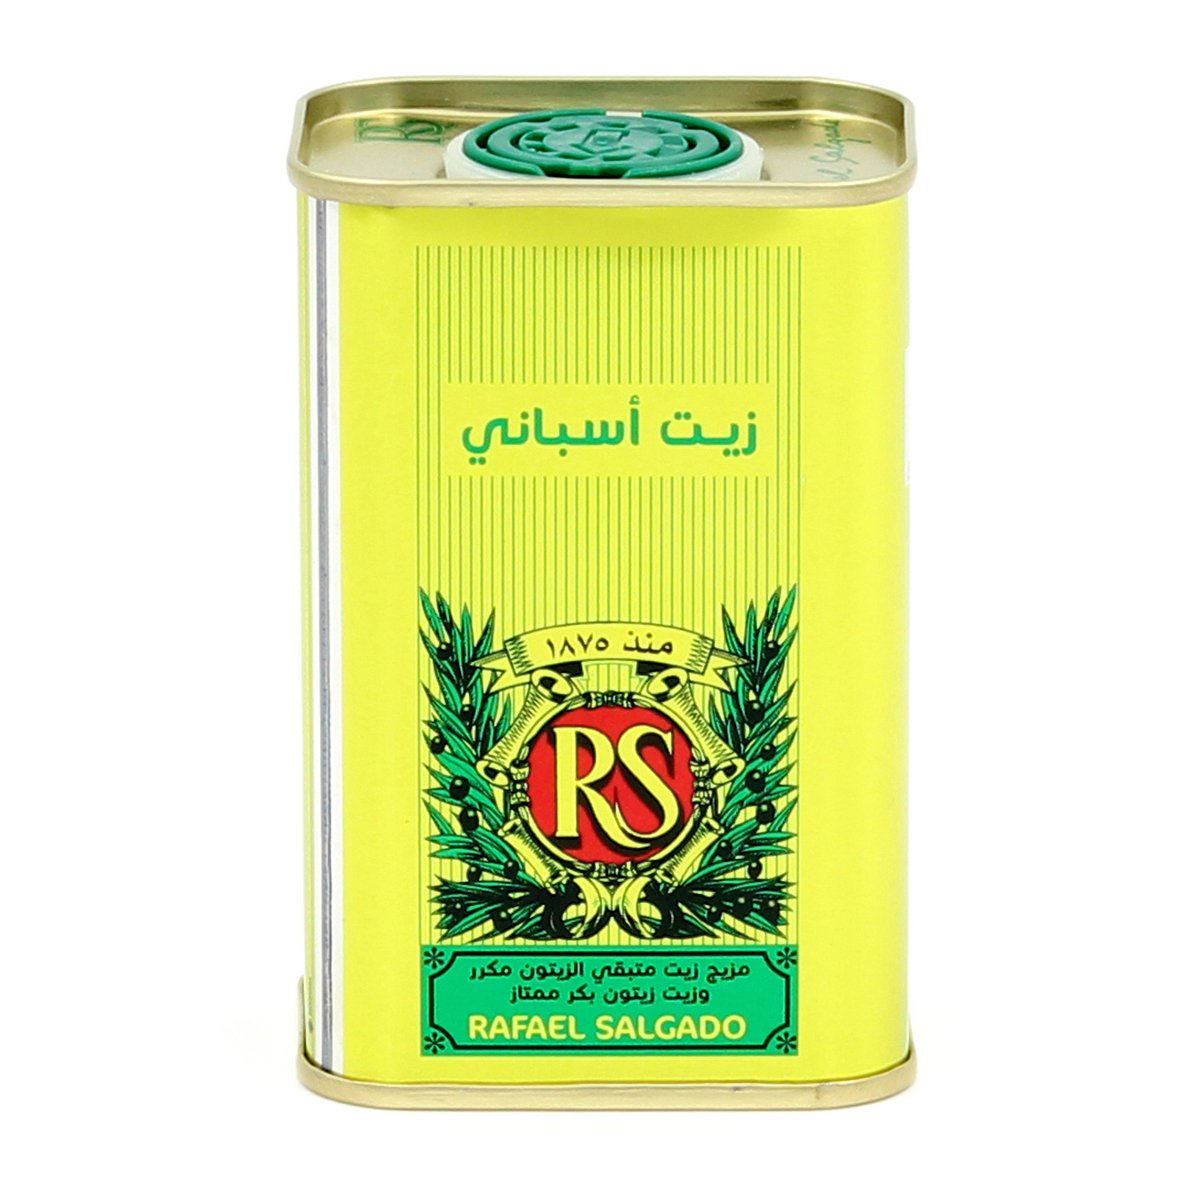 RS Olive Oil 175 ml